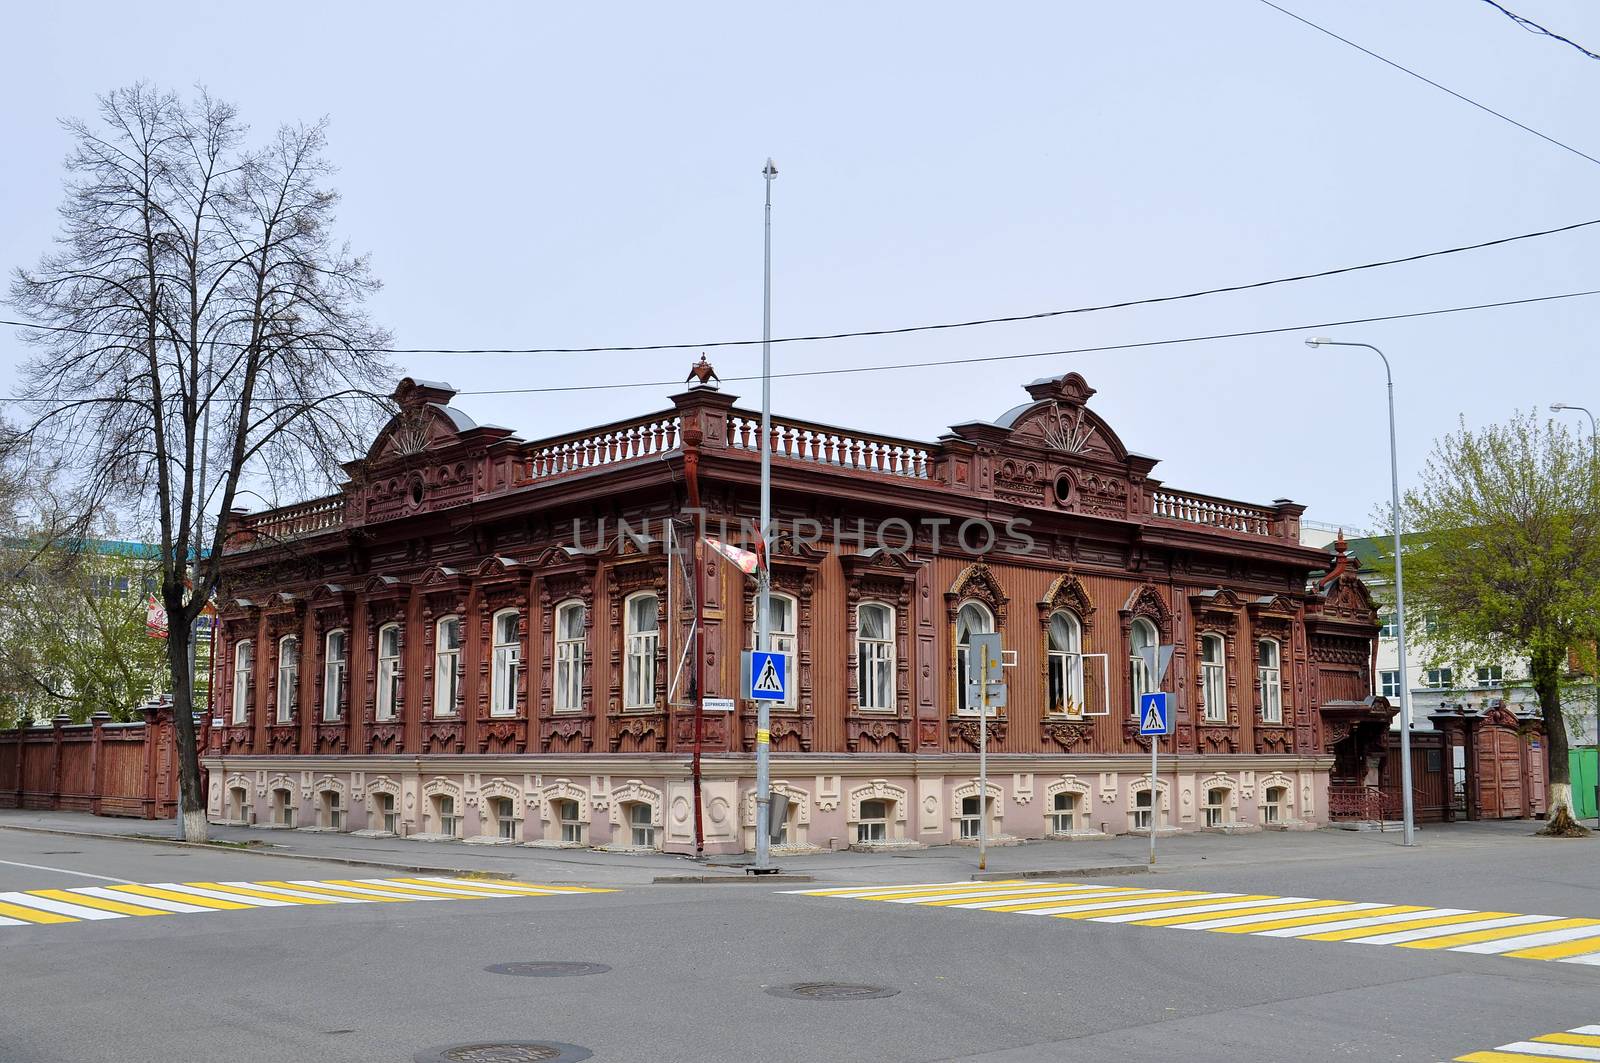 "Burkov's house" is a noticeable architectural and historical monument of Tyumen. Is on the former Sadovaya Street � nowadays to Dzerzhinsky Street. The house constructed by one of the richest people of Tyumen, the merchant of the first guild Vasily Petrovich Burkov is similar to the small palace. The decor of facades of the house unites in itself lines of stone and national wooden architecture. On a sample of stone mansions the front stairs and a main entrance are turned on the street. And here various types of carved platbands and other wooden elements of the building reflect specifics of a decor of wooden buildings.

In 1905 Burkov allocated the first floor of the house for placement of legal club "Union of Workers of Tyumen". The millionaire and the shipowner Ivan Ignatov gave to club the richest library. In club passed discussion of the questions connected with professional affairs of workers, self-education and cultural life of the city. By 1906 the club became the real power, and ideas of the Bolshevism here began to get. For this reason club closed, and Bolsheviks went underground.

Address: Tyumen, Dzerzhinsky St., 30